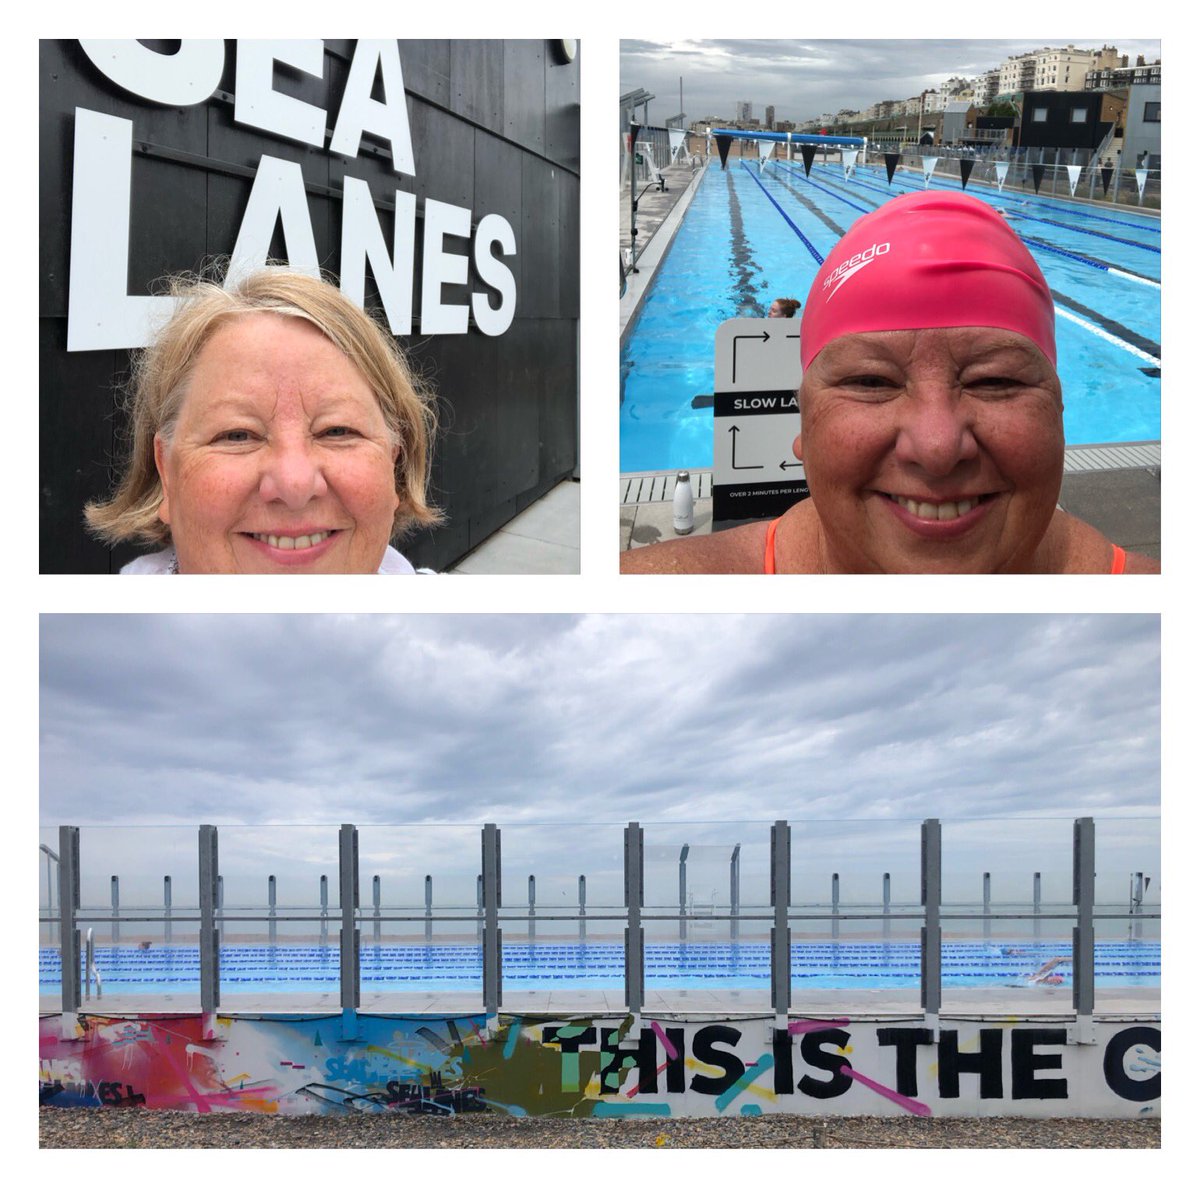 Swim # 100/100 🎉 at #SeaLanesBrighton. 
2100m today, 20,924m this month so far
100 consecutive days = 
105 swims 🏊🏻‍♀️ totalling
216,143m or 216km
Here’s to the next step - 150! 👀💪🏻❤️😱